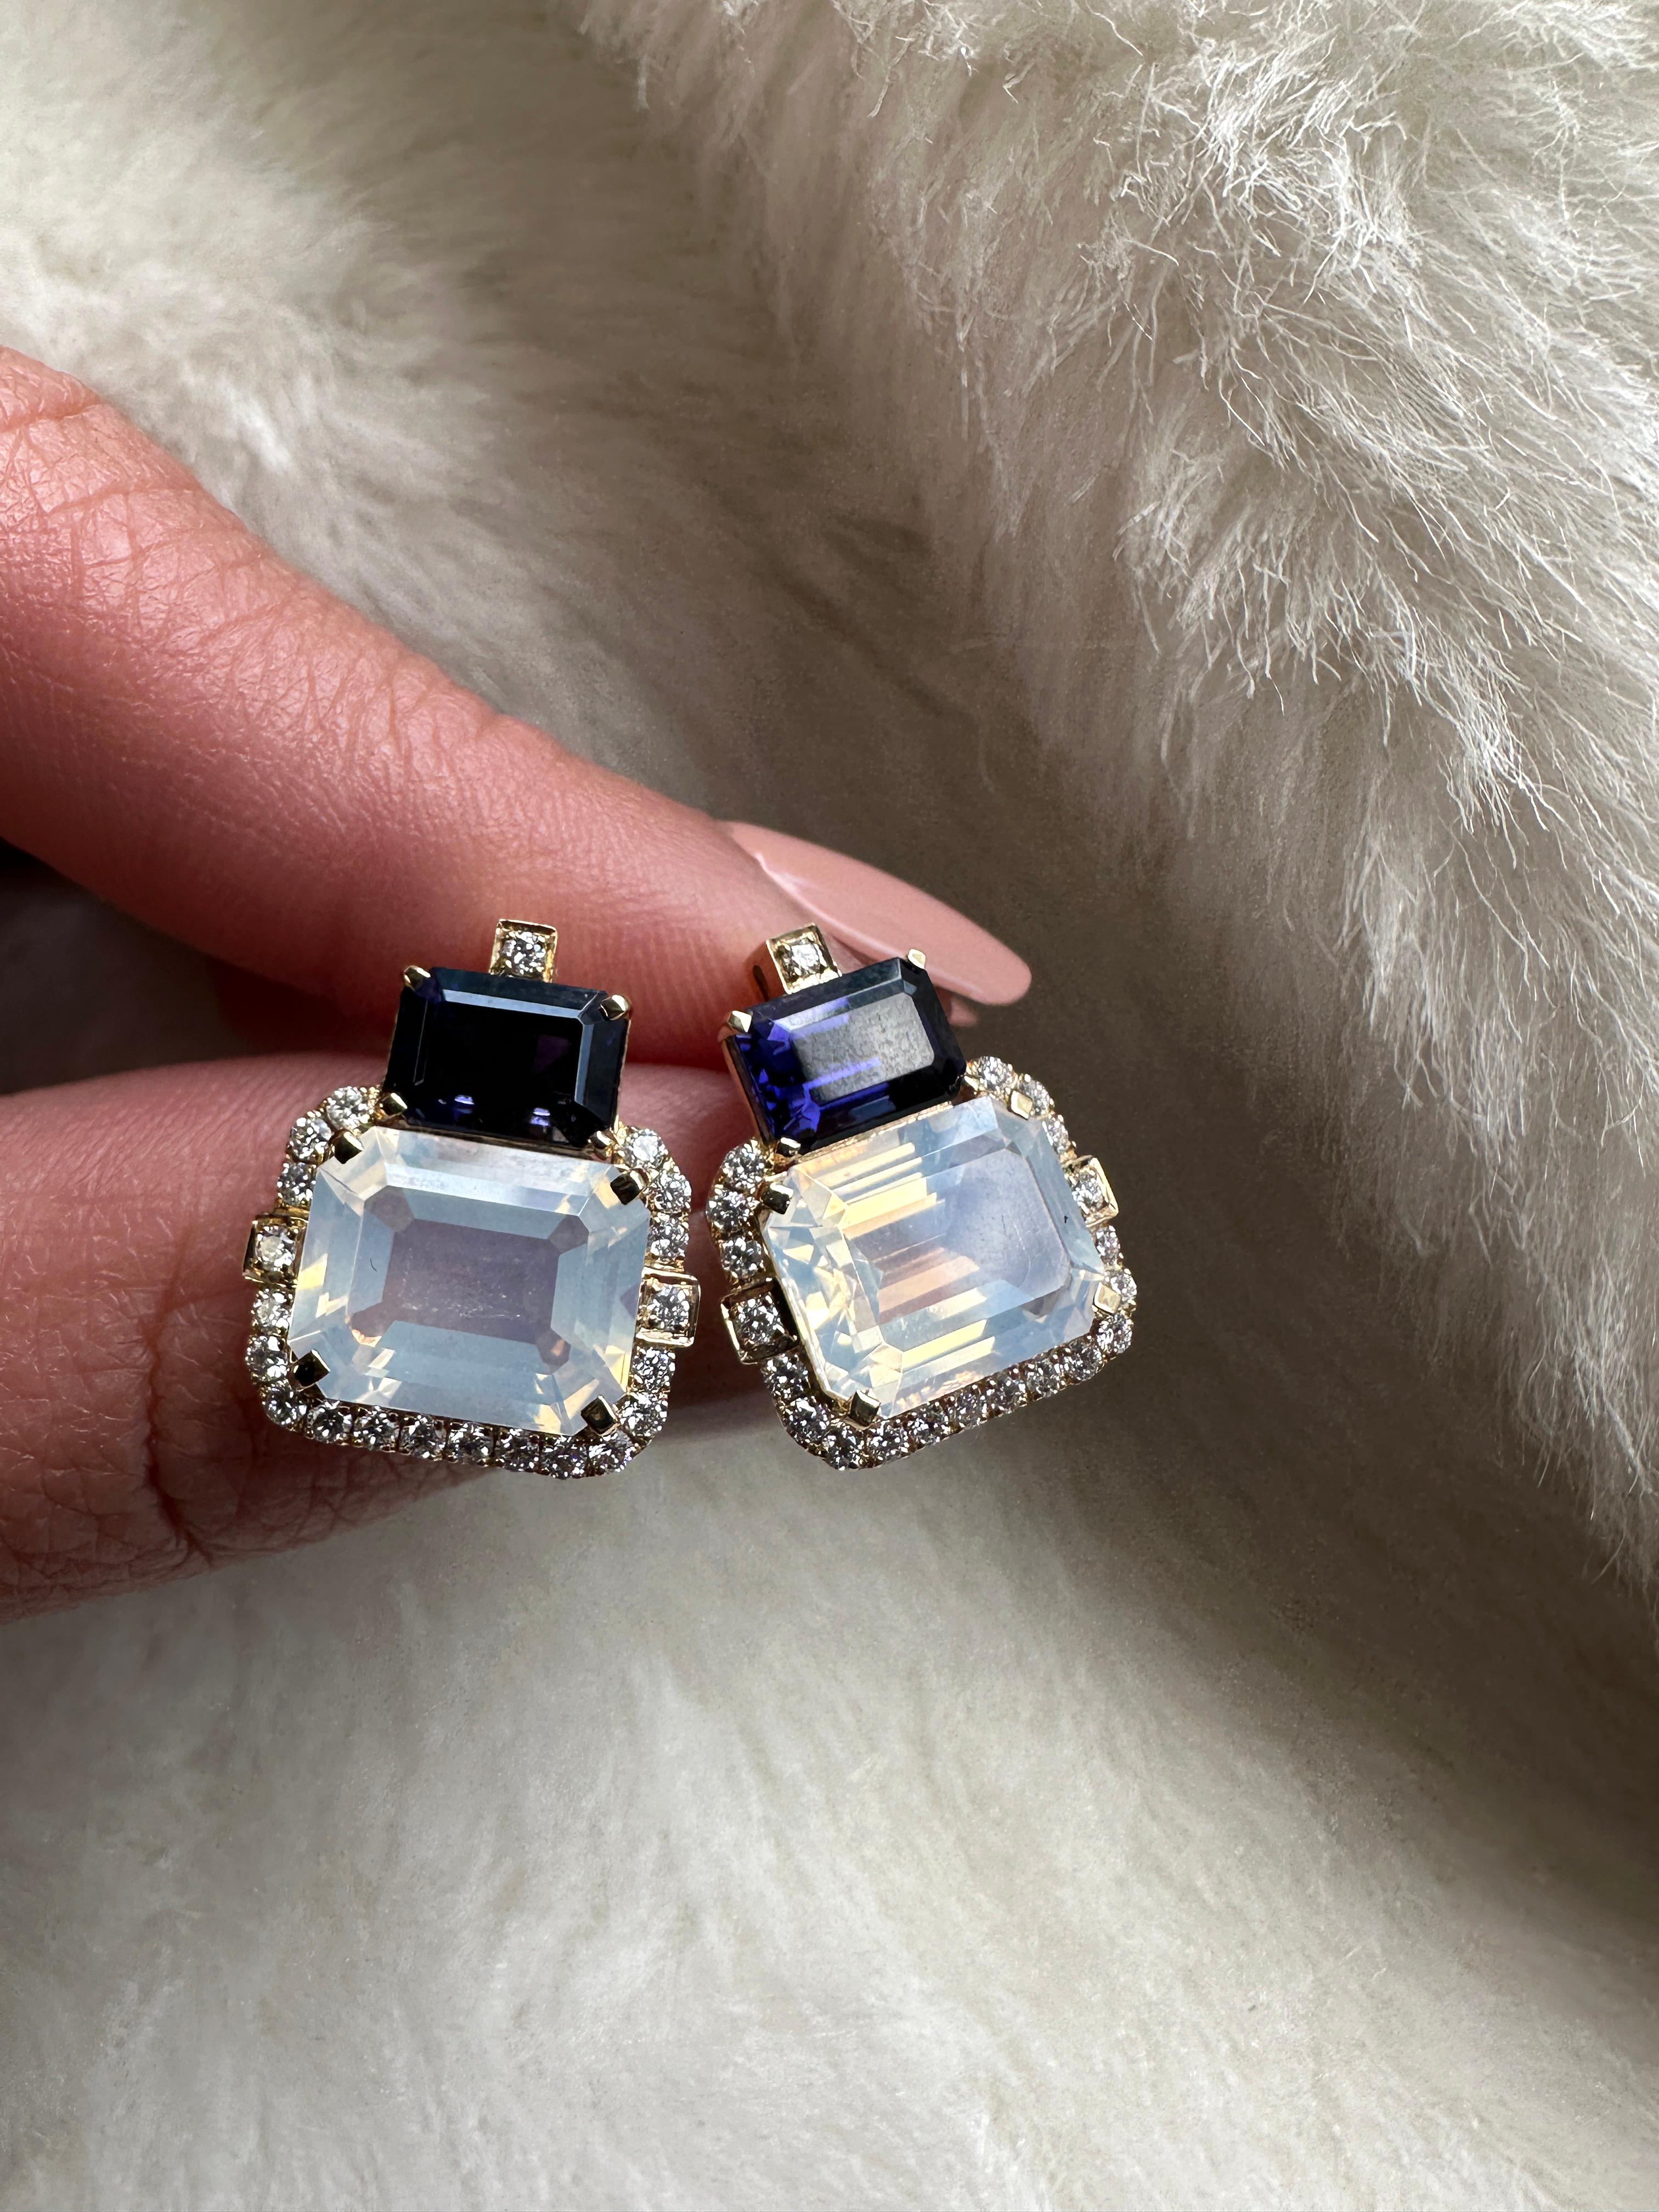 Introducing the captivating 2 Stone Iolite and Moon Quartz Emerald Cut Earrings with Diamonds in 18K Yellow Gold, a remarkable creation from the exquisite 'Gossip' Collection. Crafted with meticulous attention to detail, these earrings embody